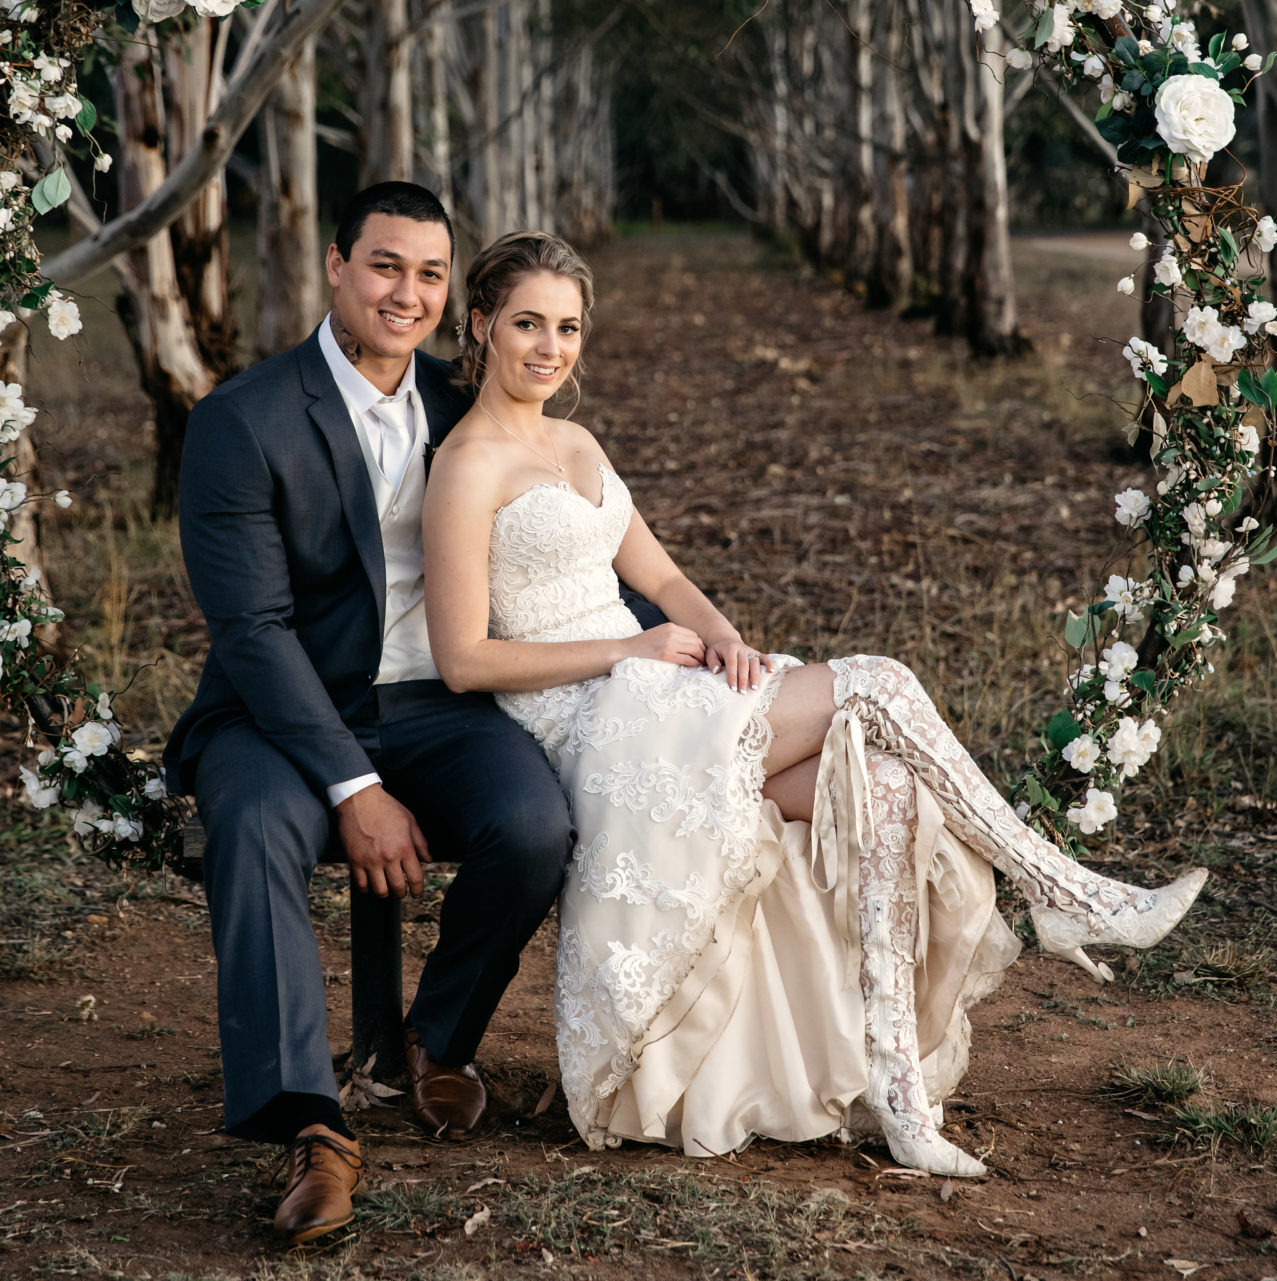 Bride Chloe wearing unique lace over the knee lace wedding boots